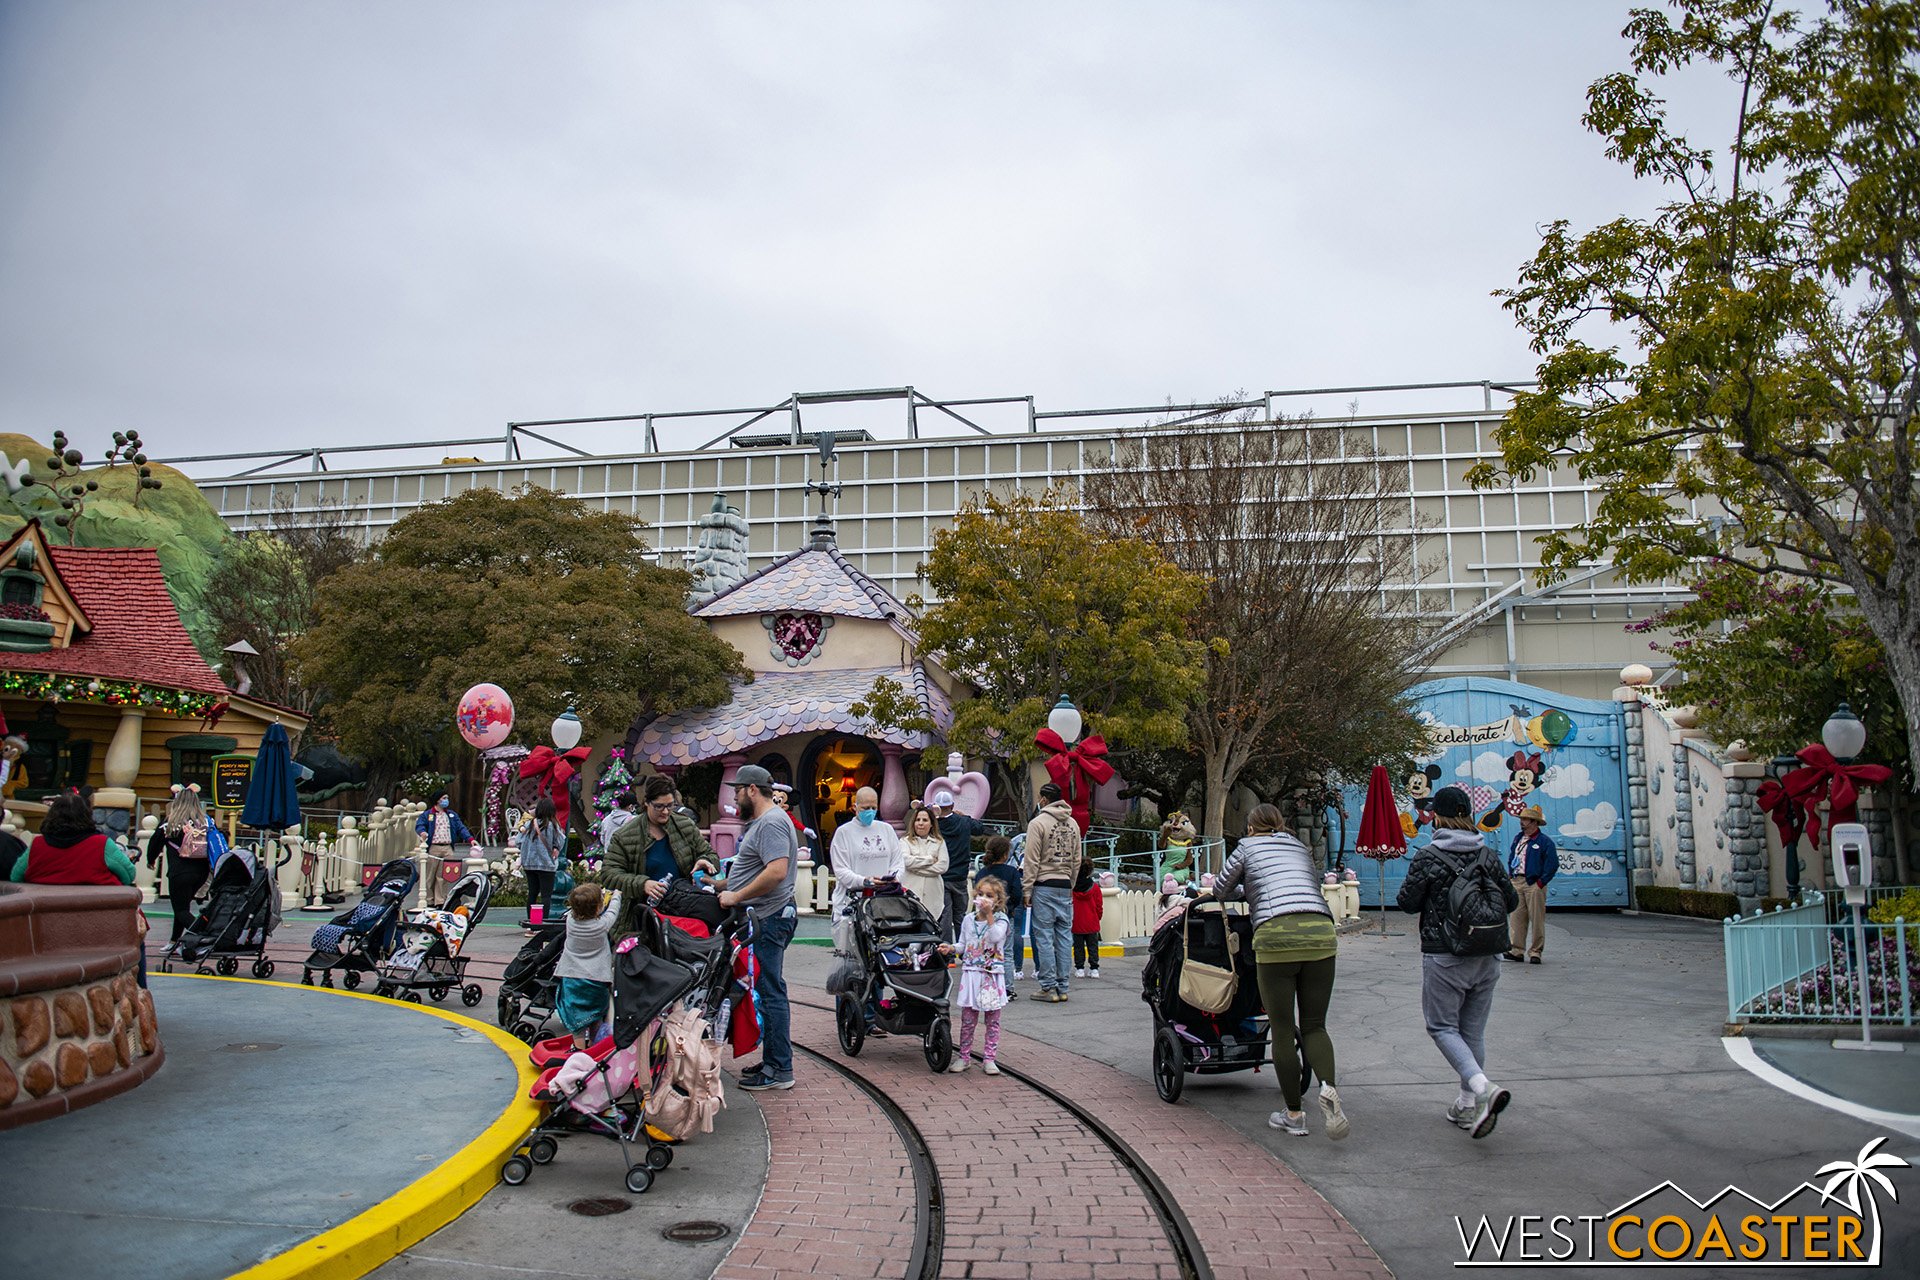  It’s nice to see Mickey’s Toontown still relatively busy. 